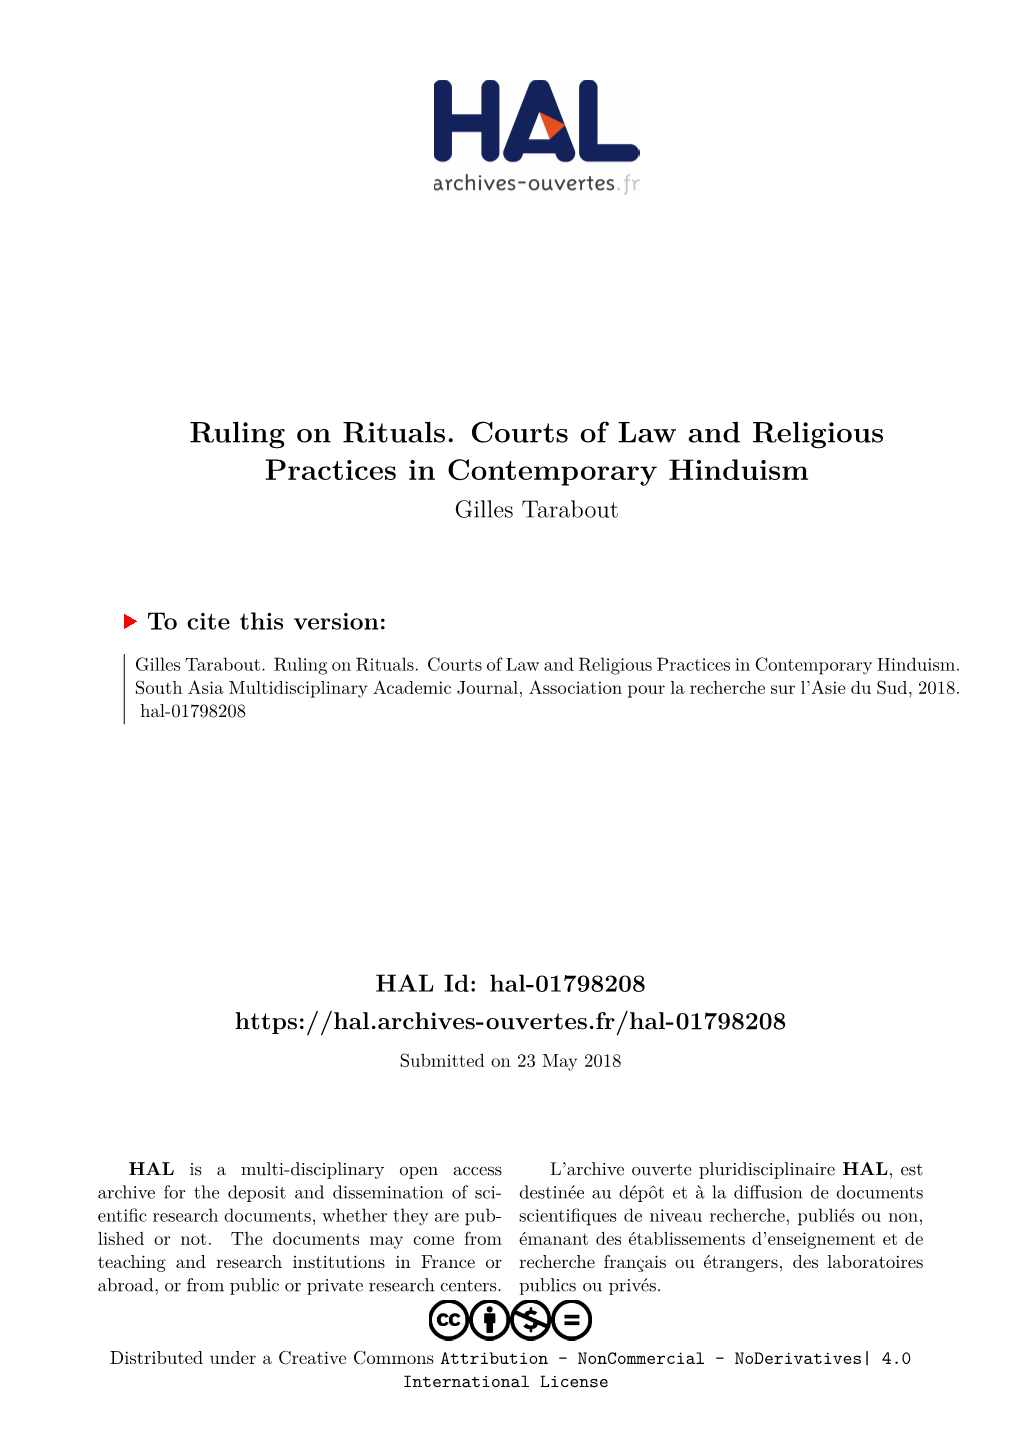 Ruling on Rituals. Courts of Law and Religious Practices in Contemporary Hinduism Gilles Tarabout